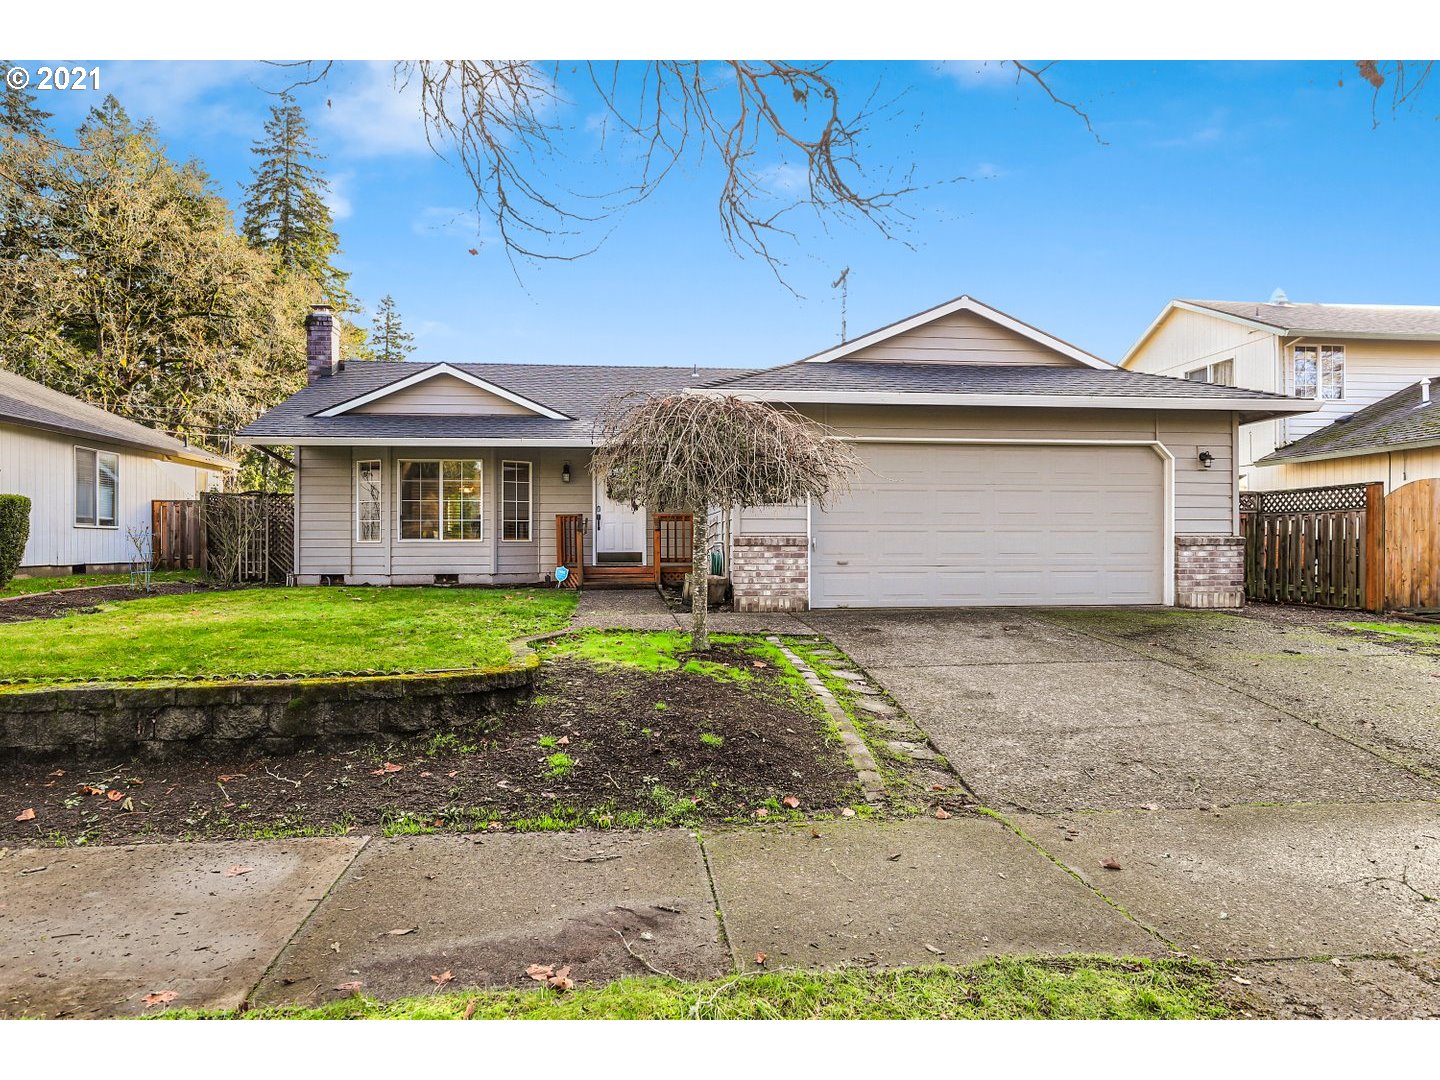 984 SE 58TH AVE (1 of 27)